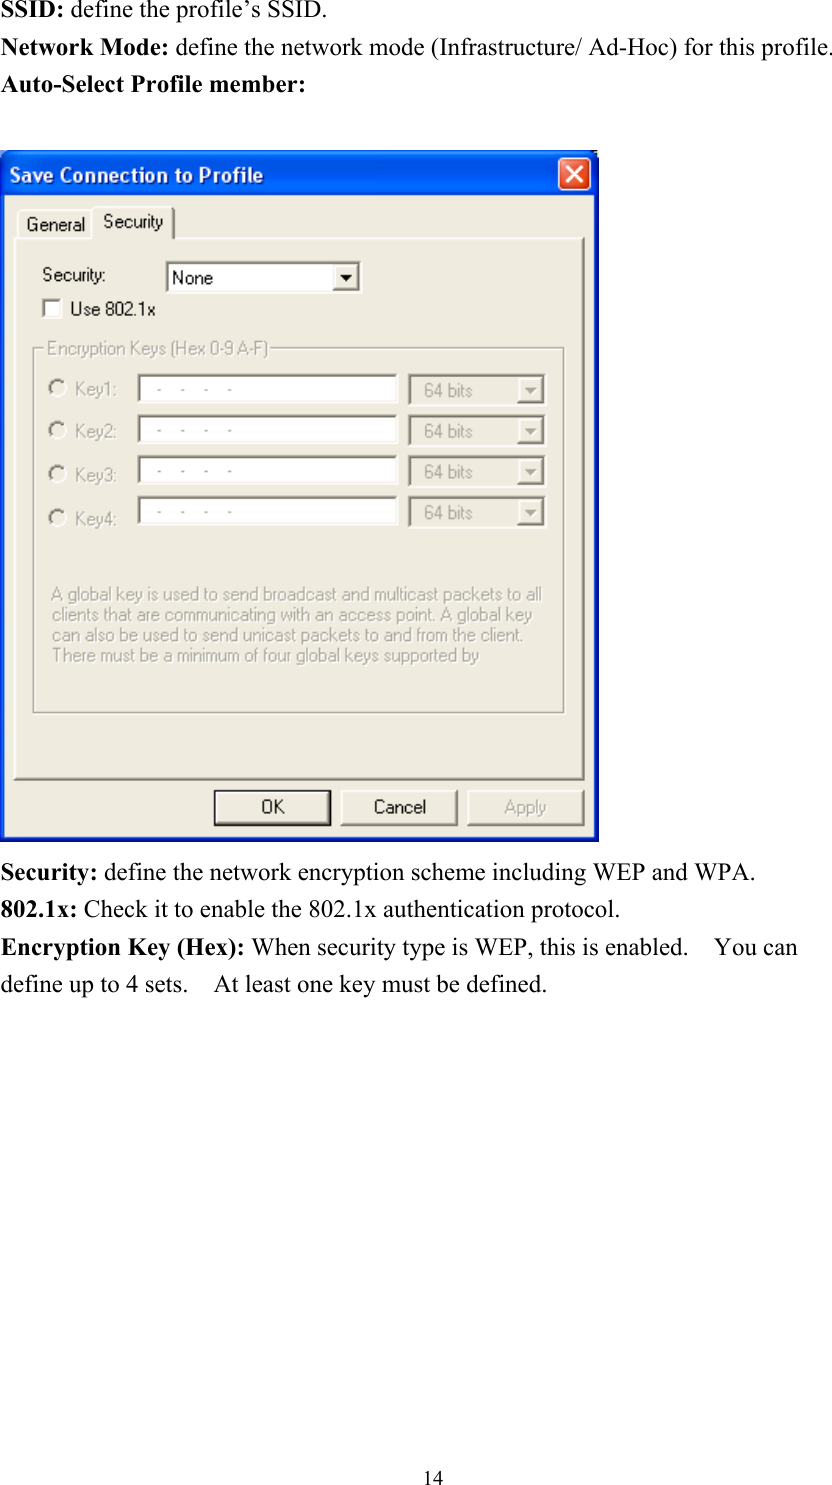 SSID: define the profile’s SSID. Network Mode: define the network mode (Infrastructure/ Ad-Hoc) for this profile. Auto-Select Profile member:    Security: define the network encryption scheme including WEP and WPA. 802.1x: Check it to enable the 802.1x authentication protocol. Encryption Key (Hex): When security type is WEP, this is enabled.    You can define up to 4 sets.    At least one key must be defined.   14